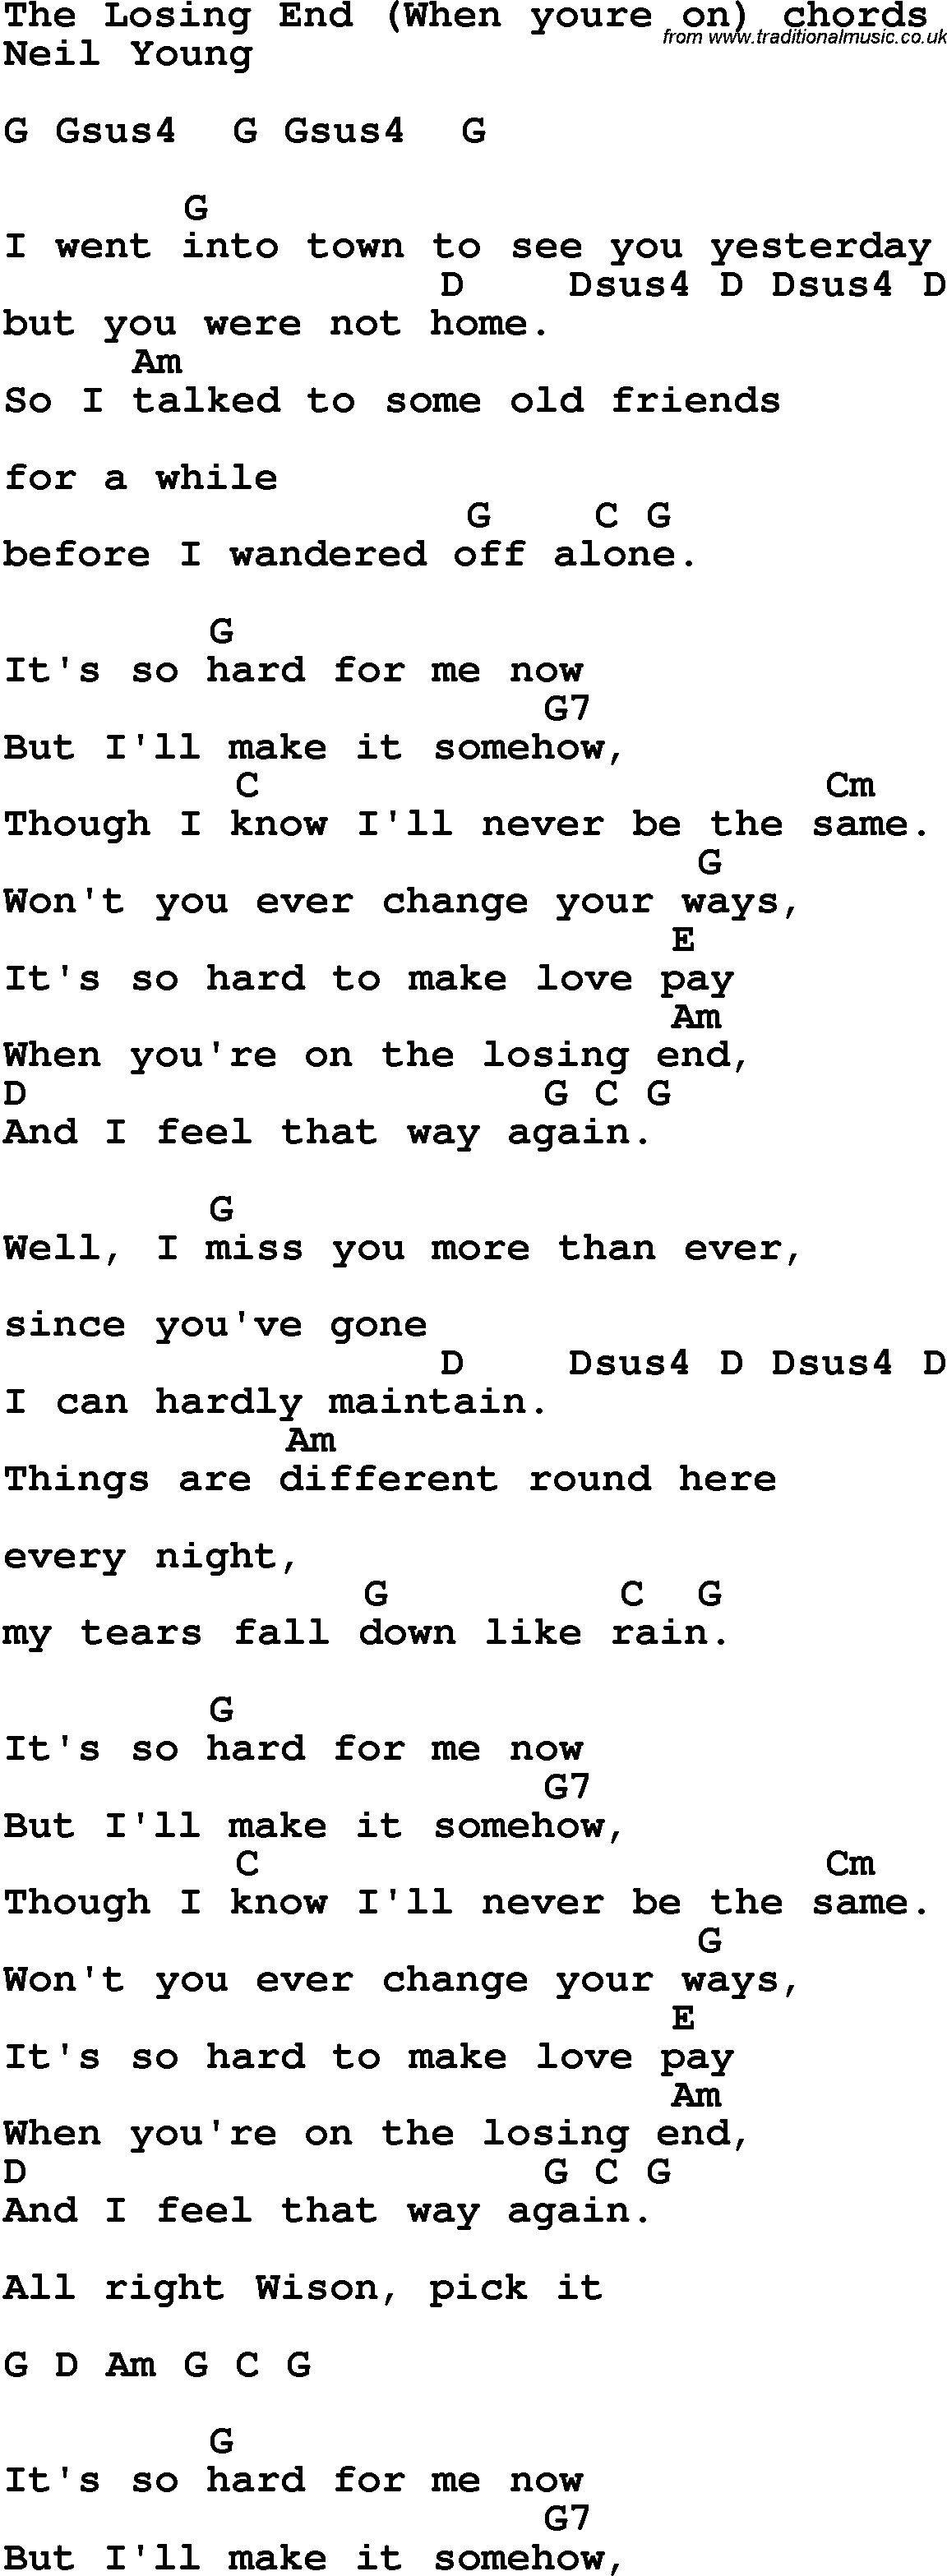 Song Lyrics with guitar chords for The Losing End - Neil Young